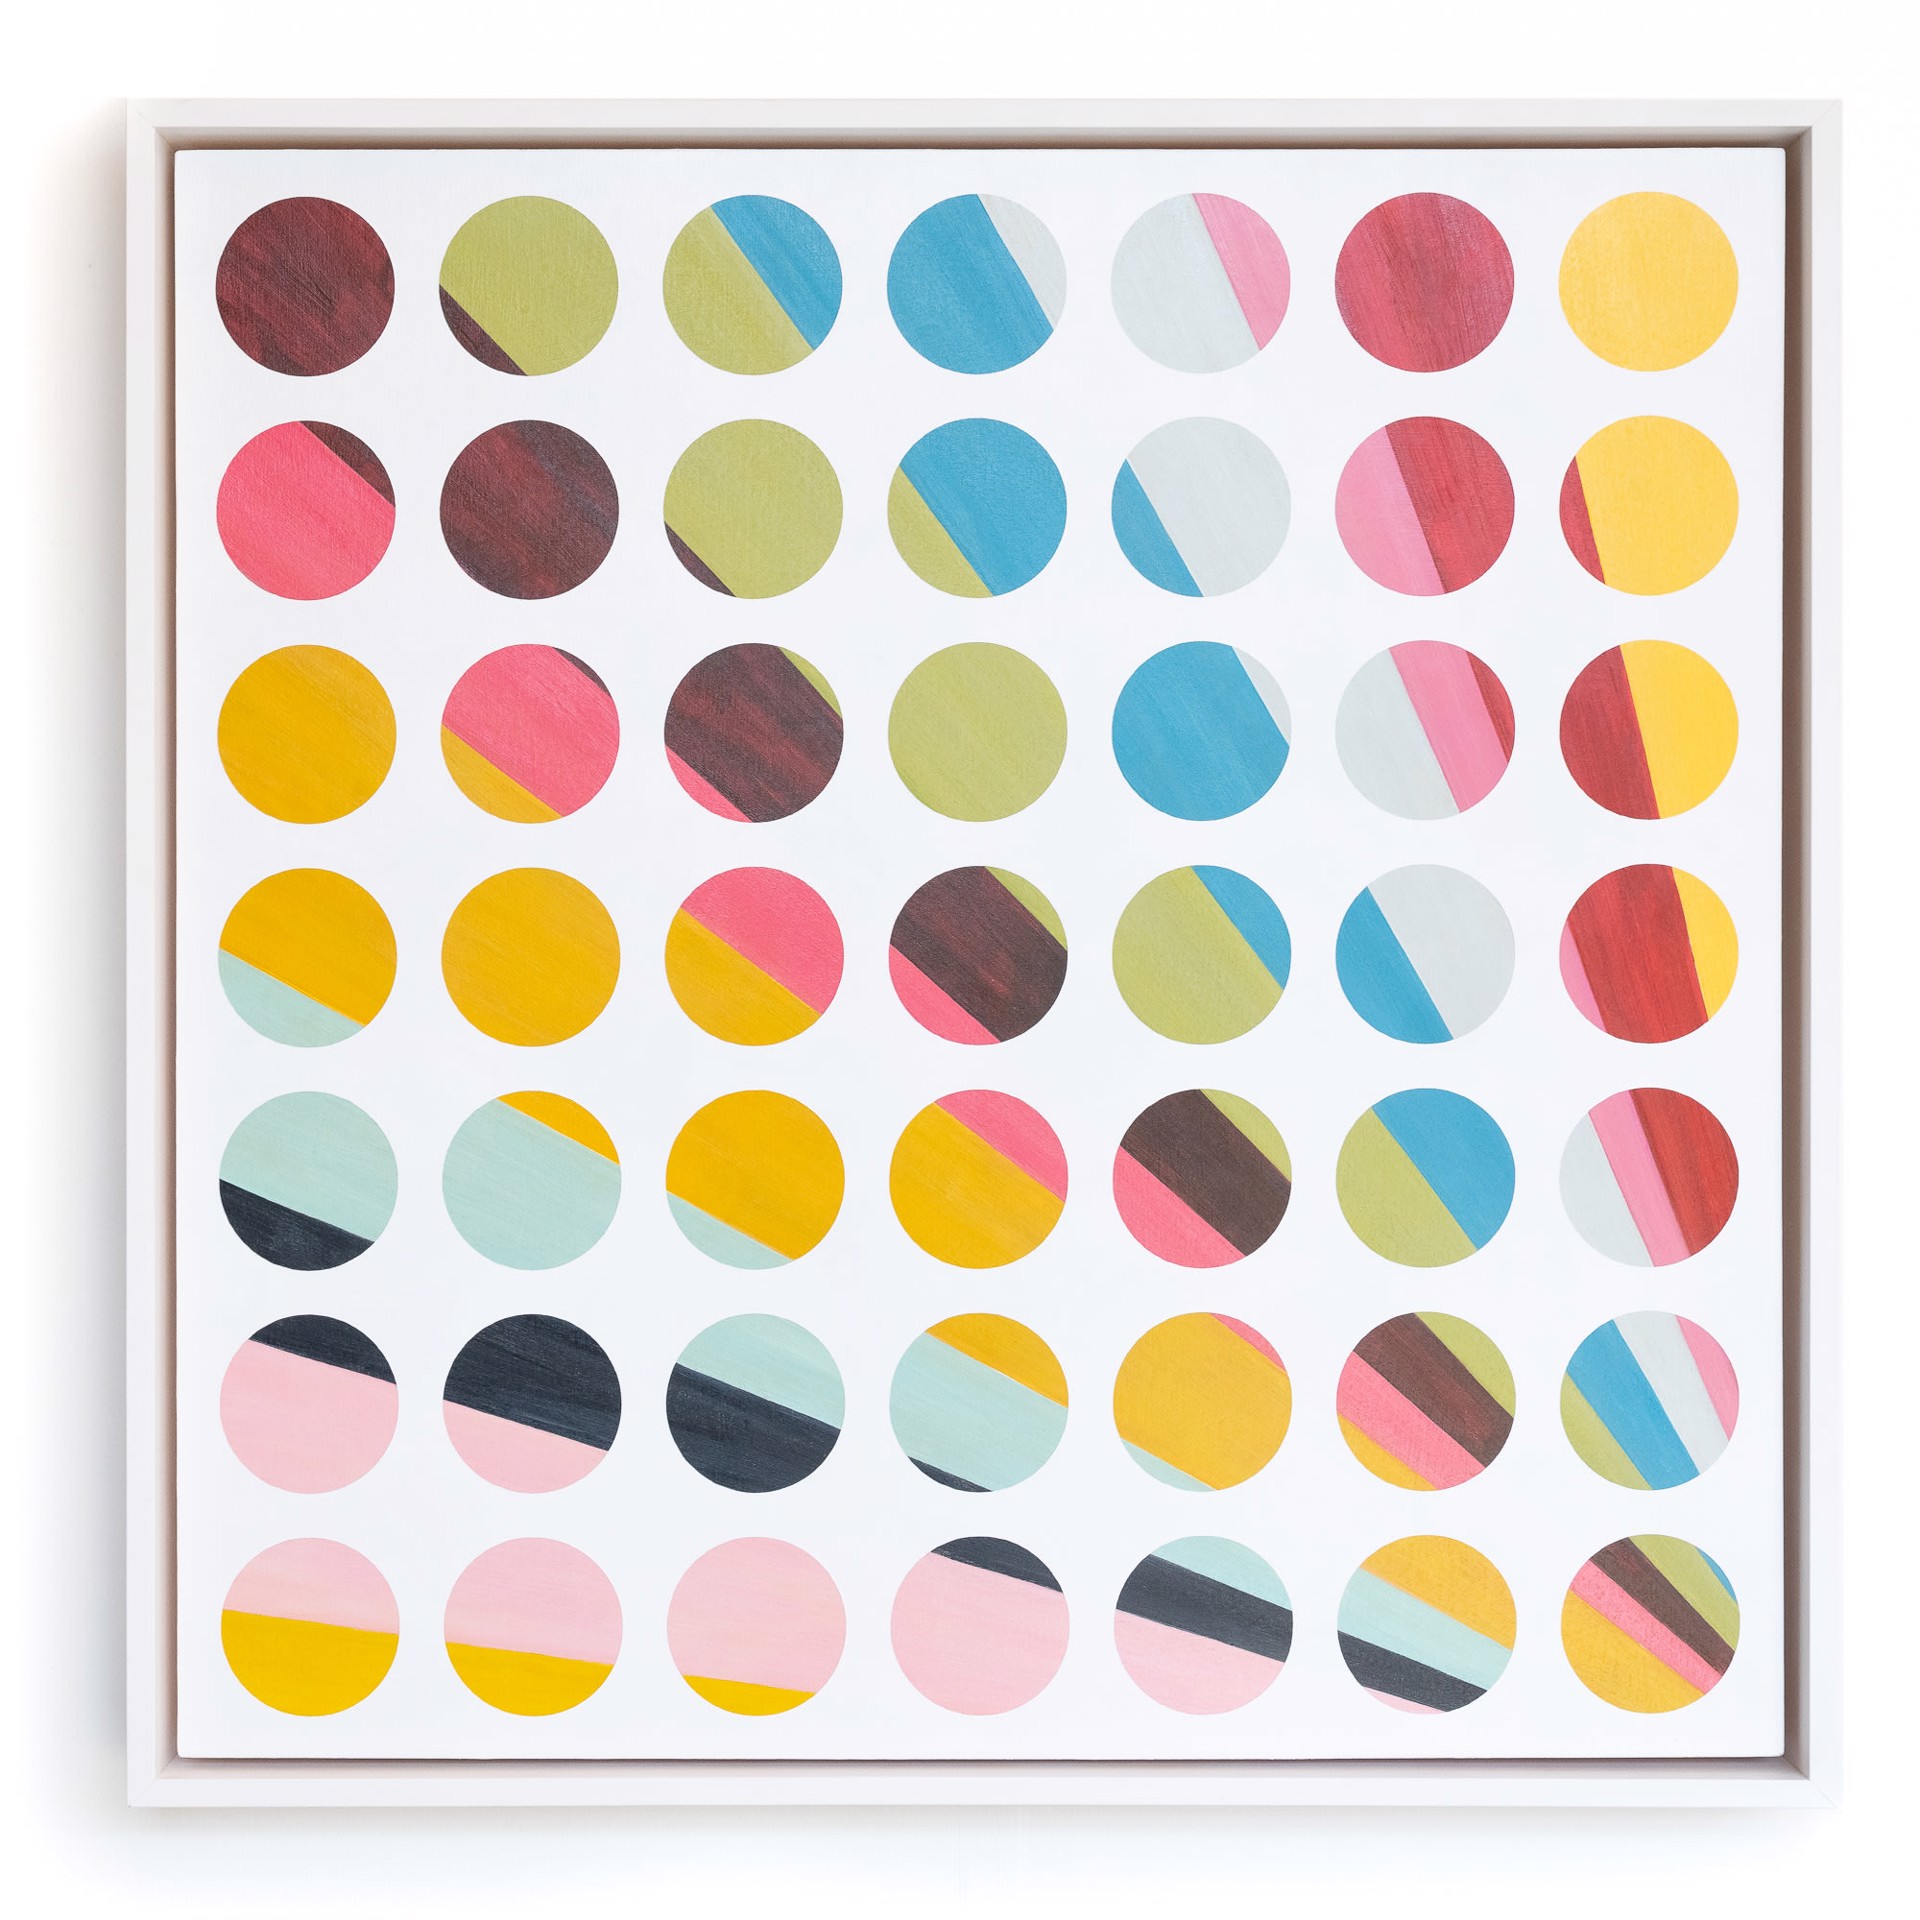 Stripey Dots Seven by Seven No. 1 by Hana Moore